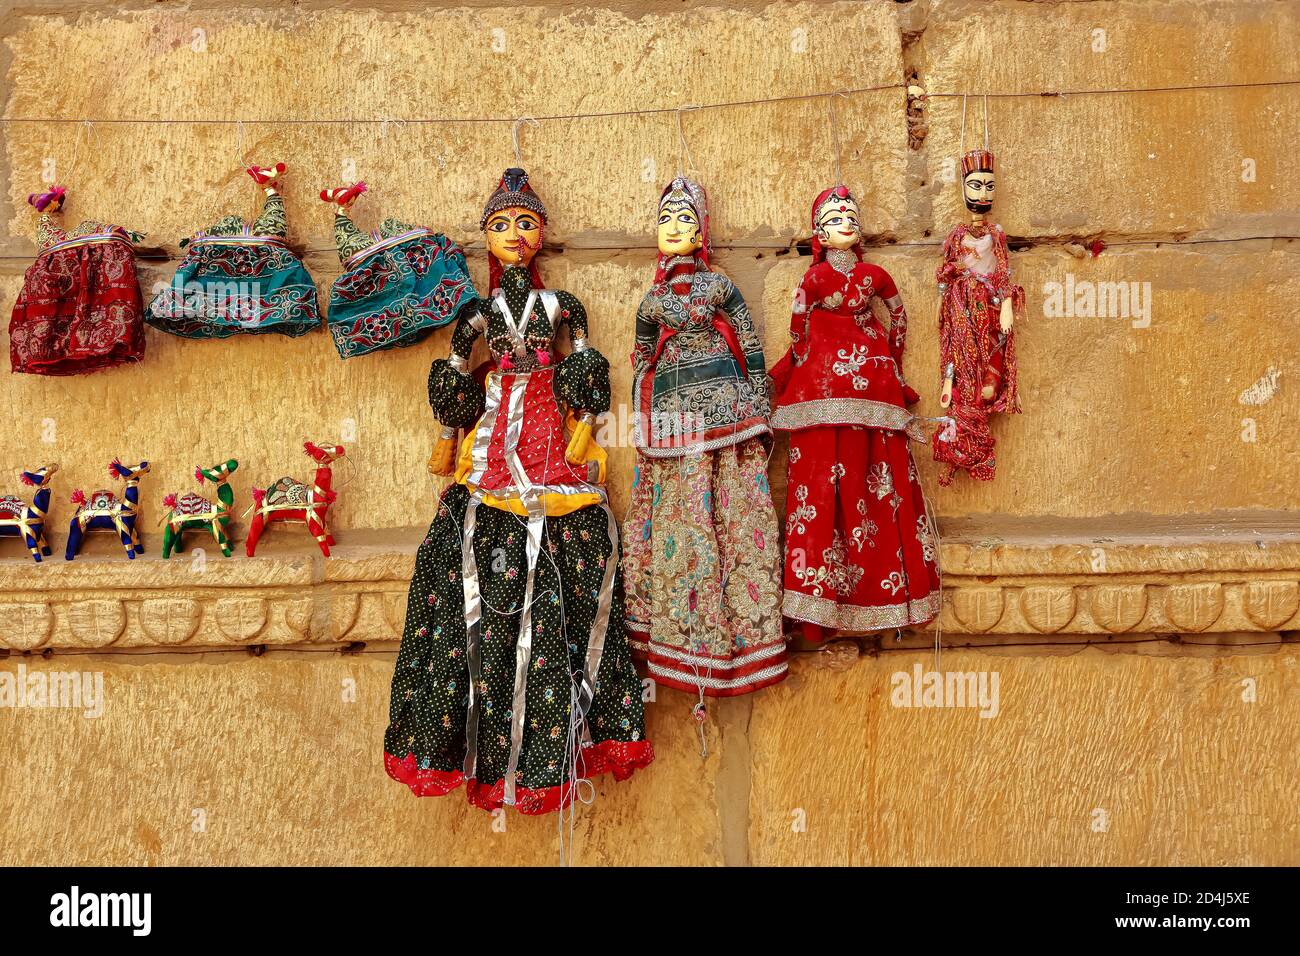 Colorful human shaped Puppets wearing colorful clothes hanging against the wall in Rajasthan India on 21 February 2018 Stock Photo